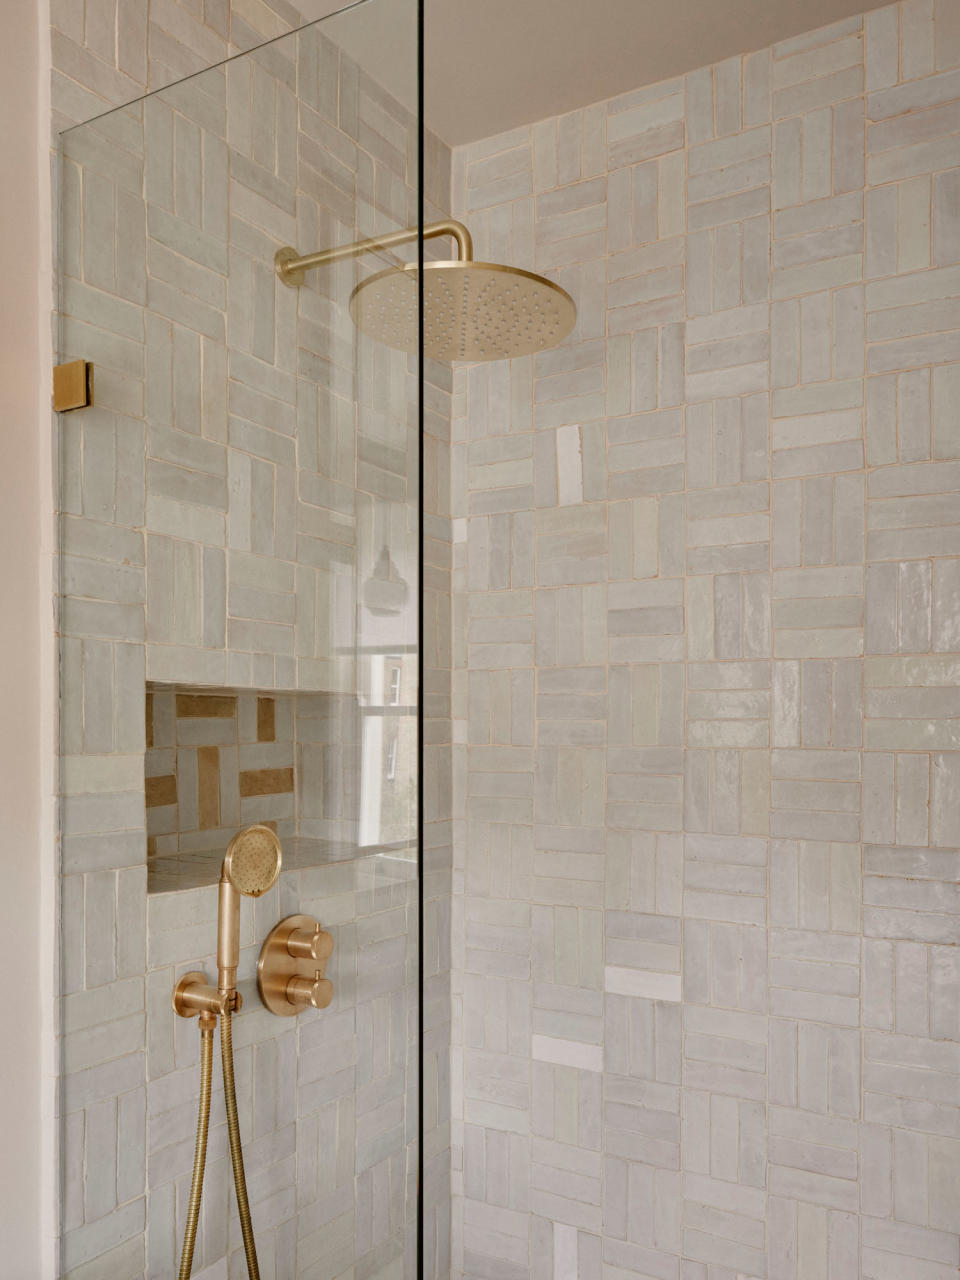 A bathroom with a zellige tiled shower